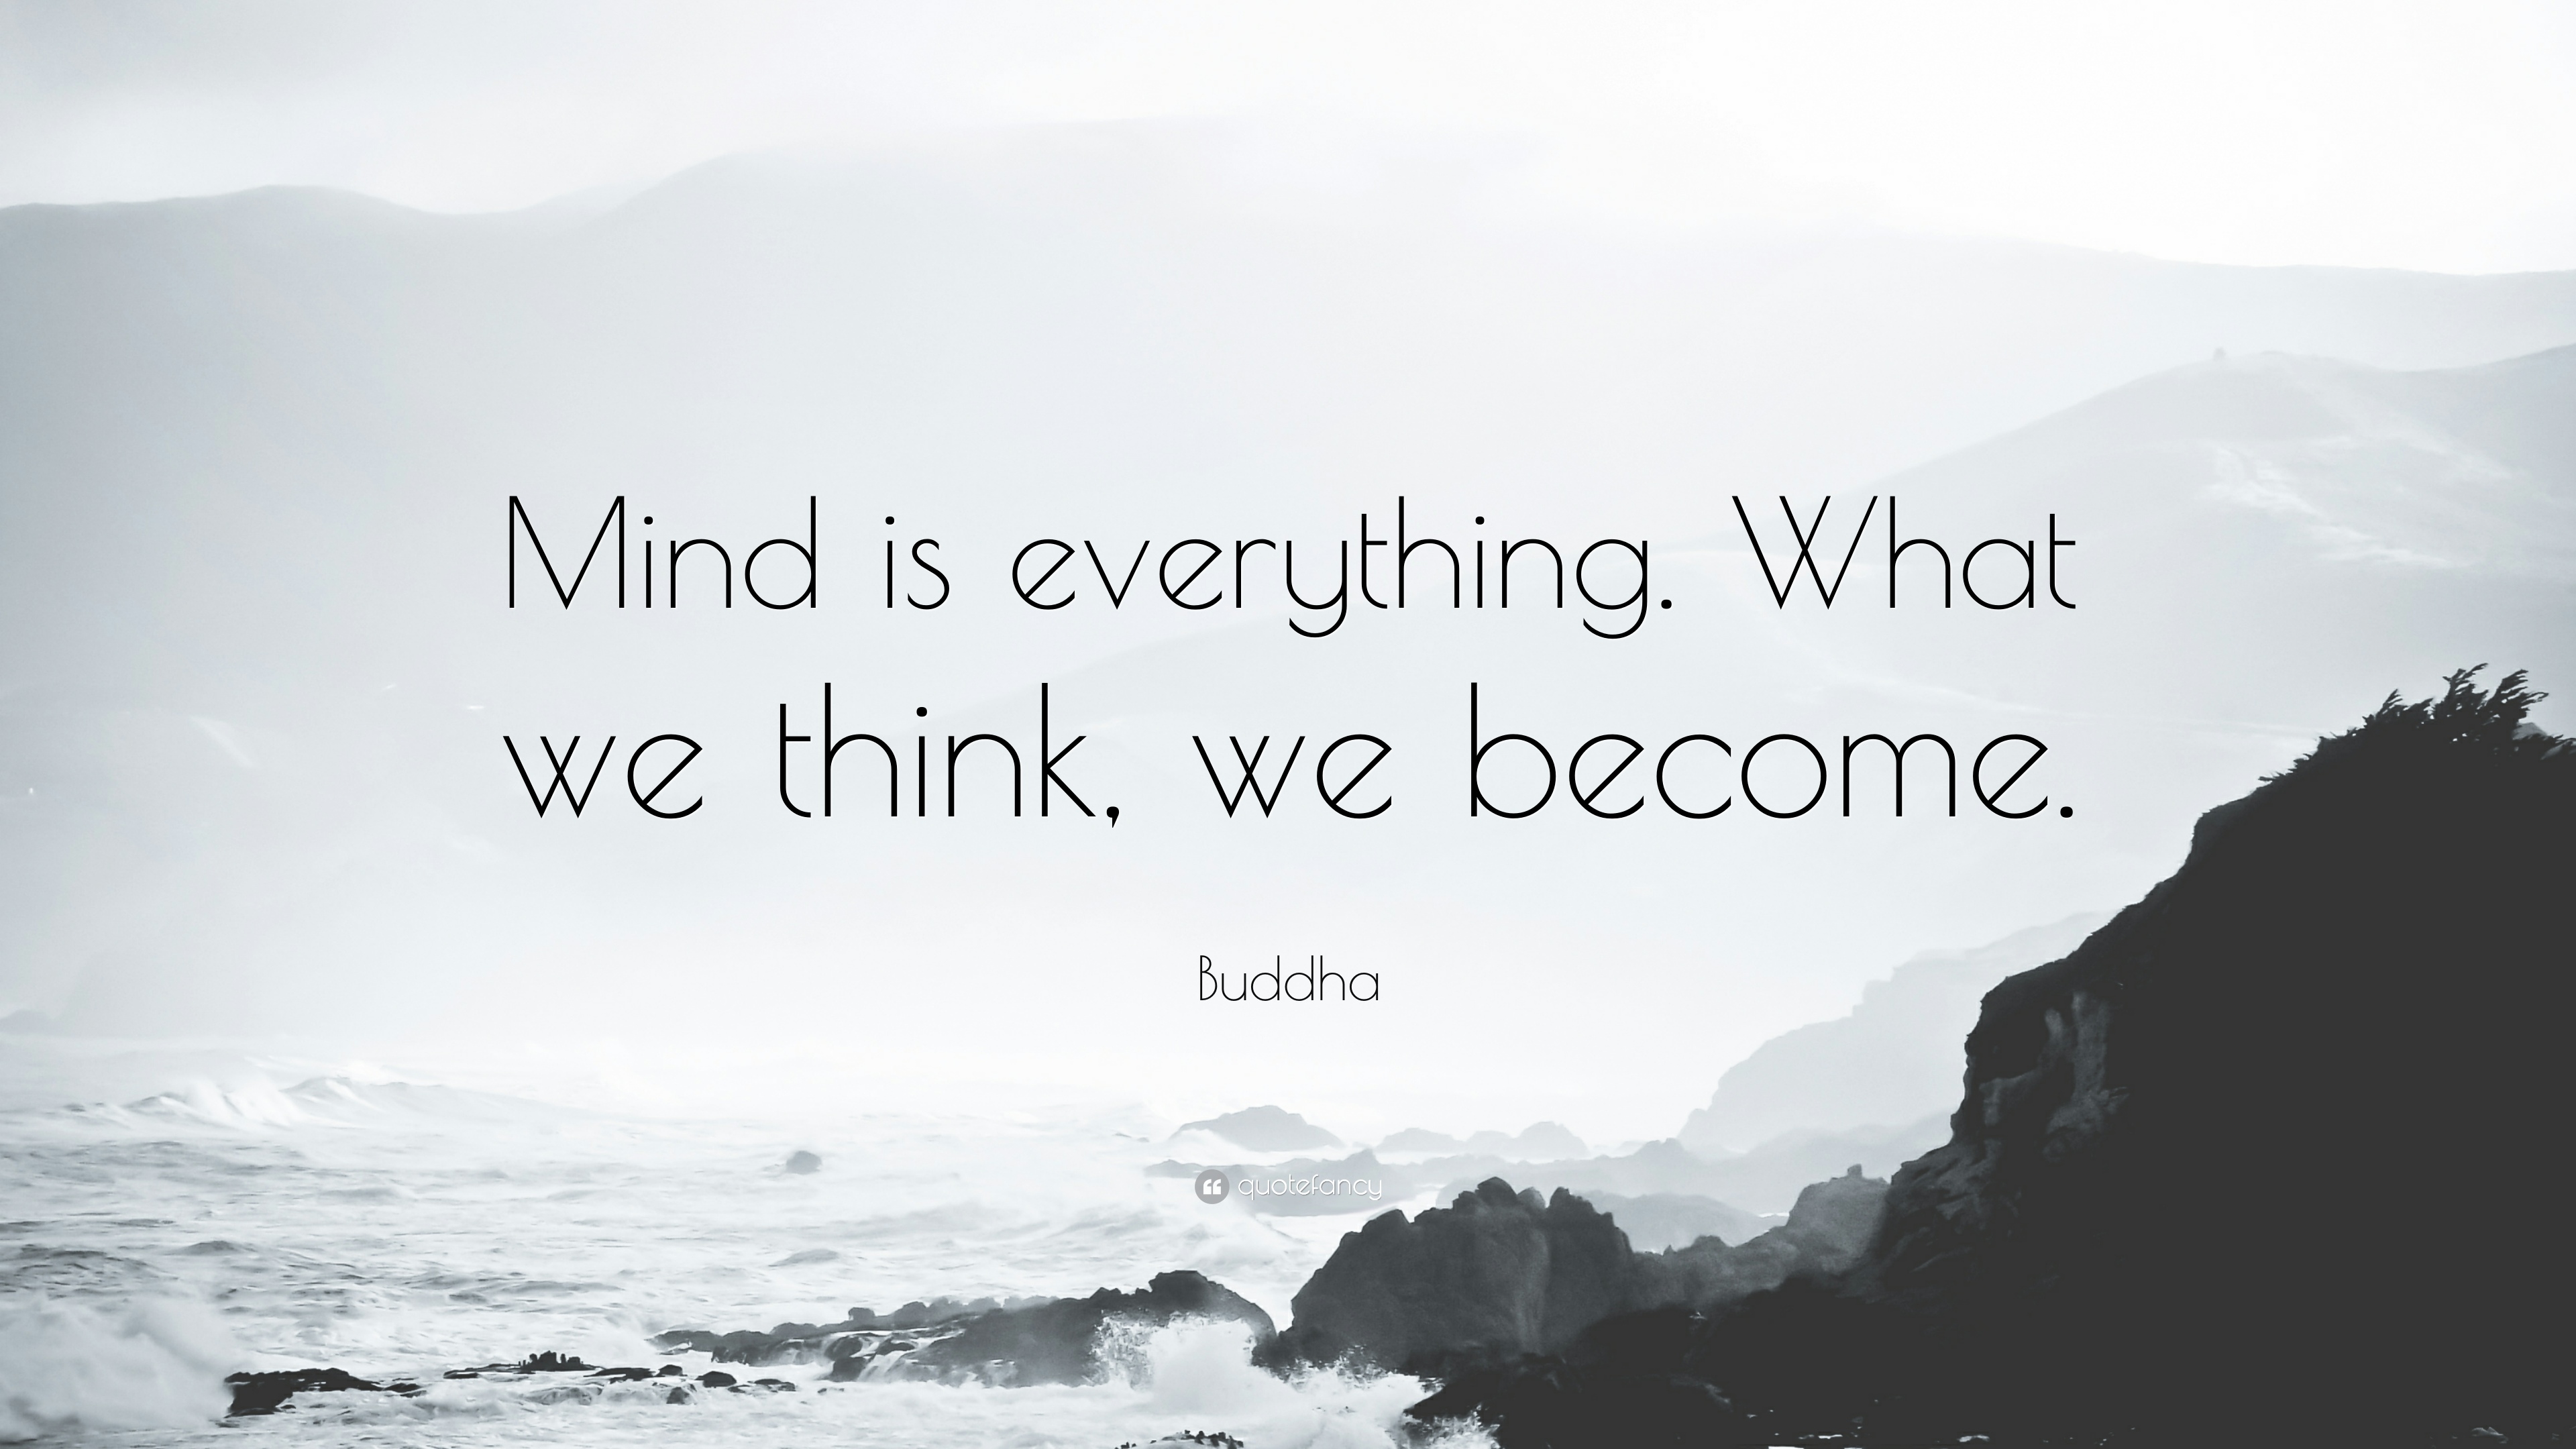 558146-Buddha-Quote-Mind-is-everything-What-we-think-we-become